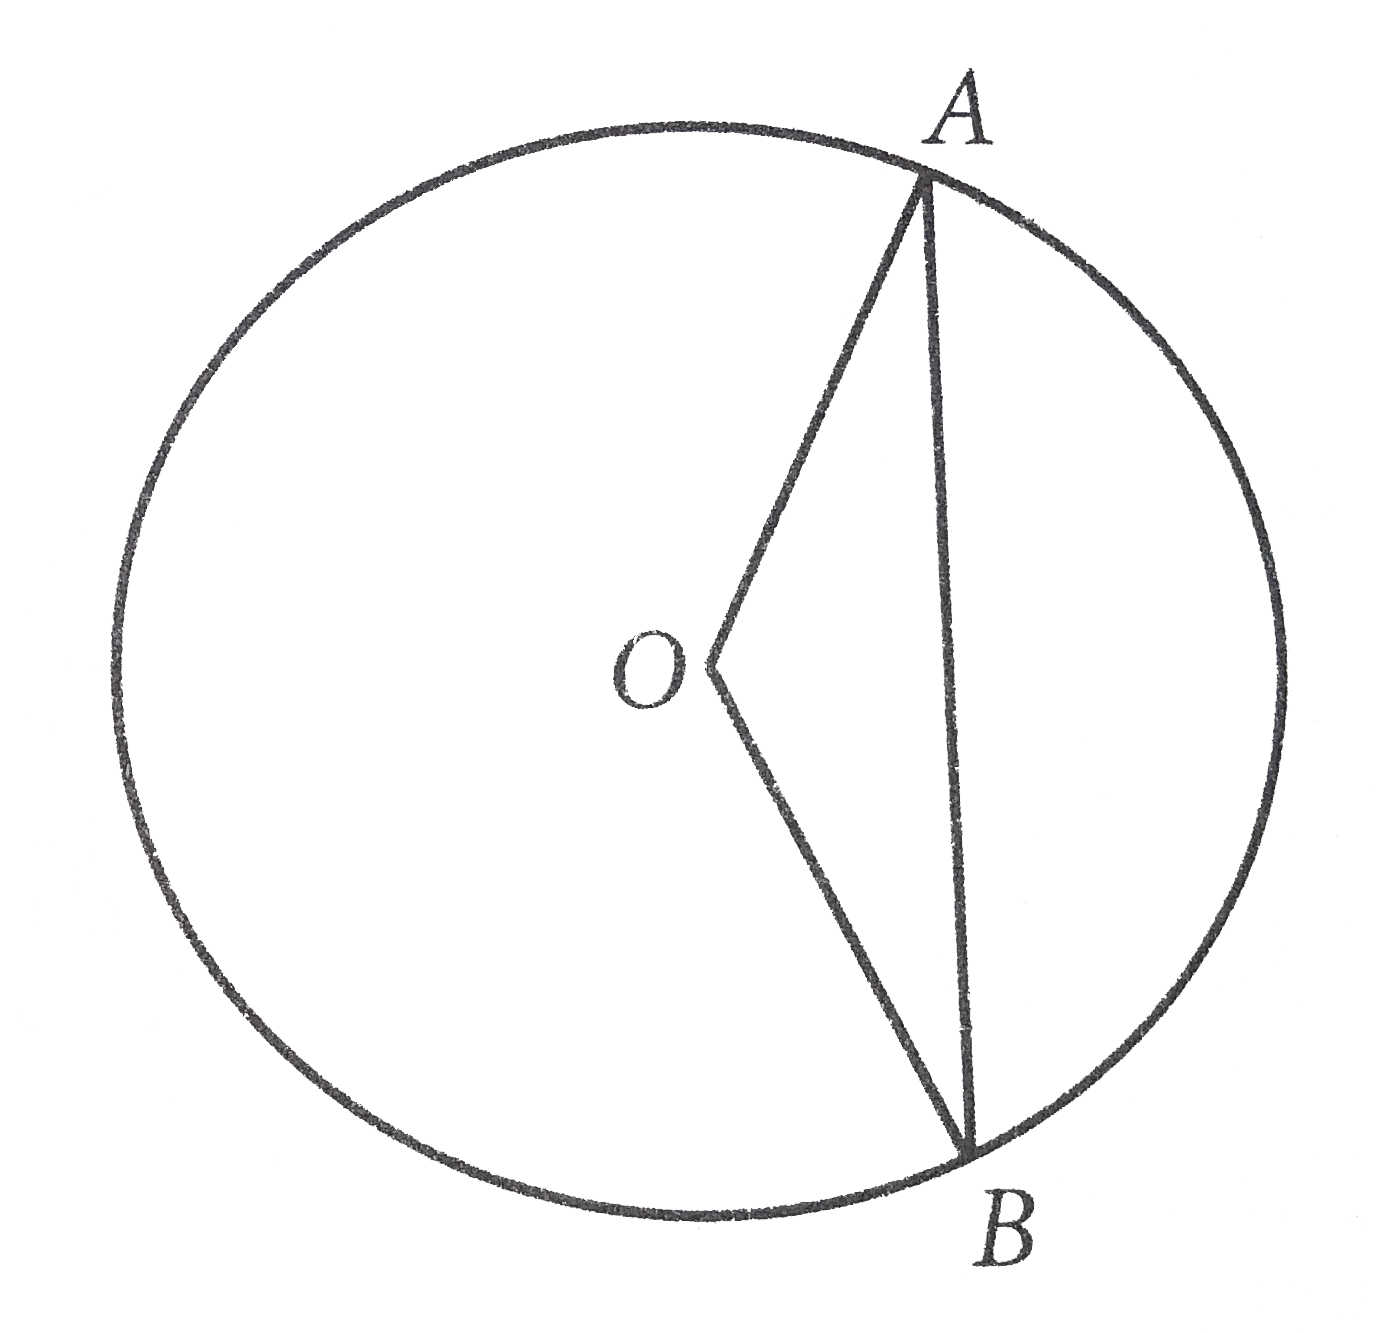 If the radius of the circle above is x, angle AOB=120^@, and O is the center of the circle, what is the length of chord AB, in terms of x?